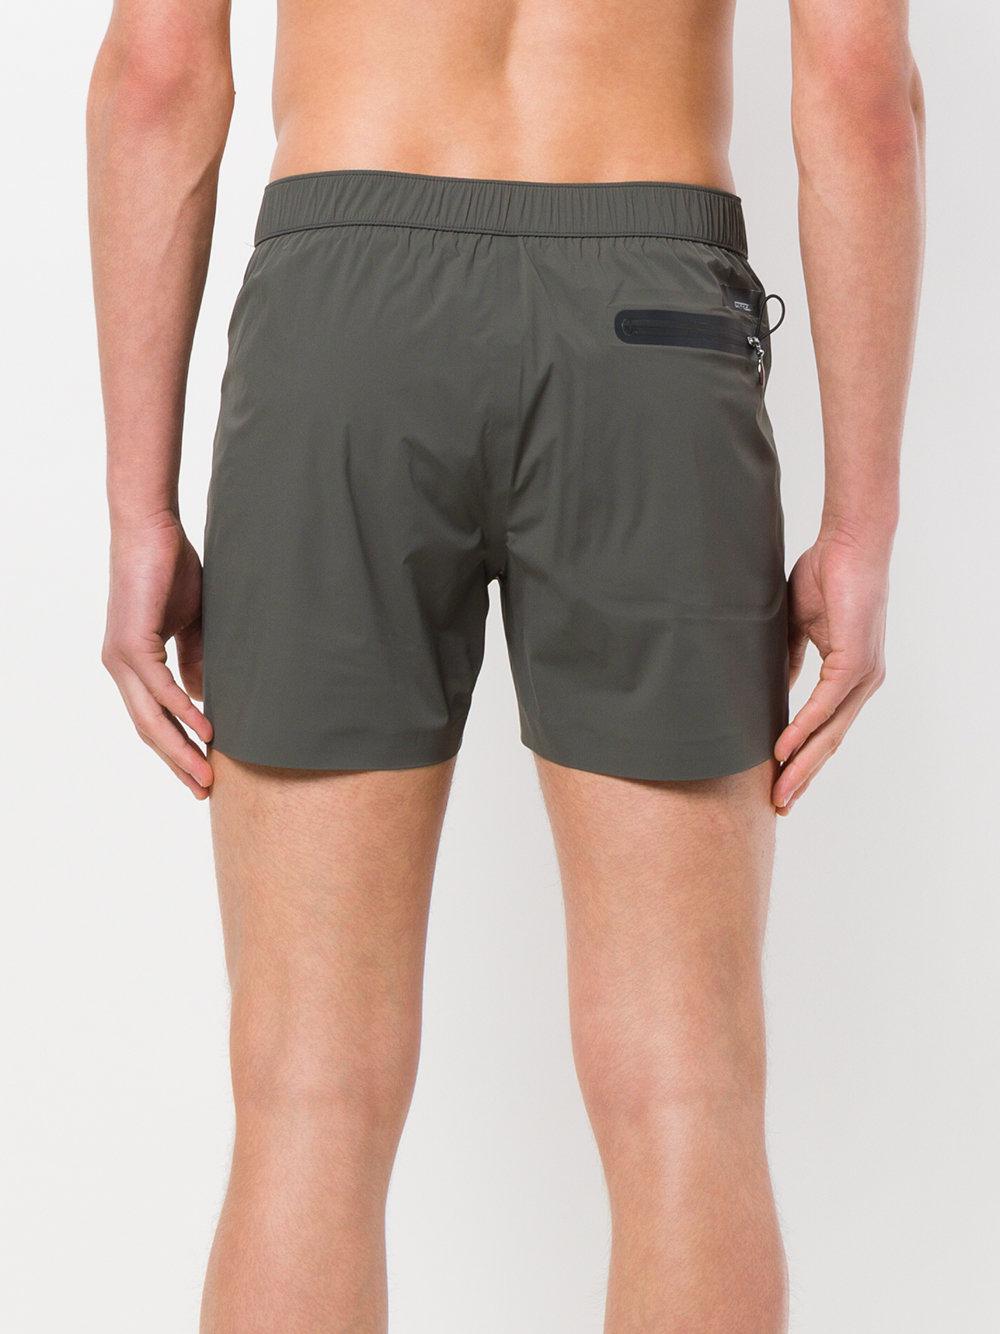 Rrd Synthetic Slim-fit Swim Shorts in Green for Men - Lyst